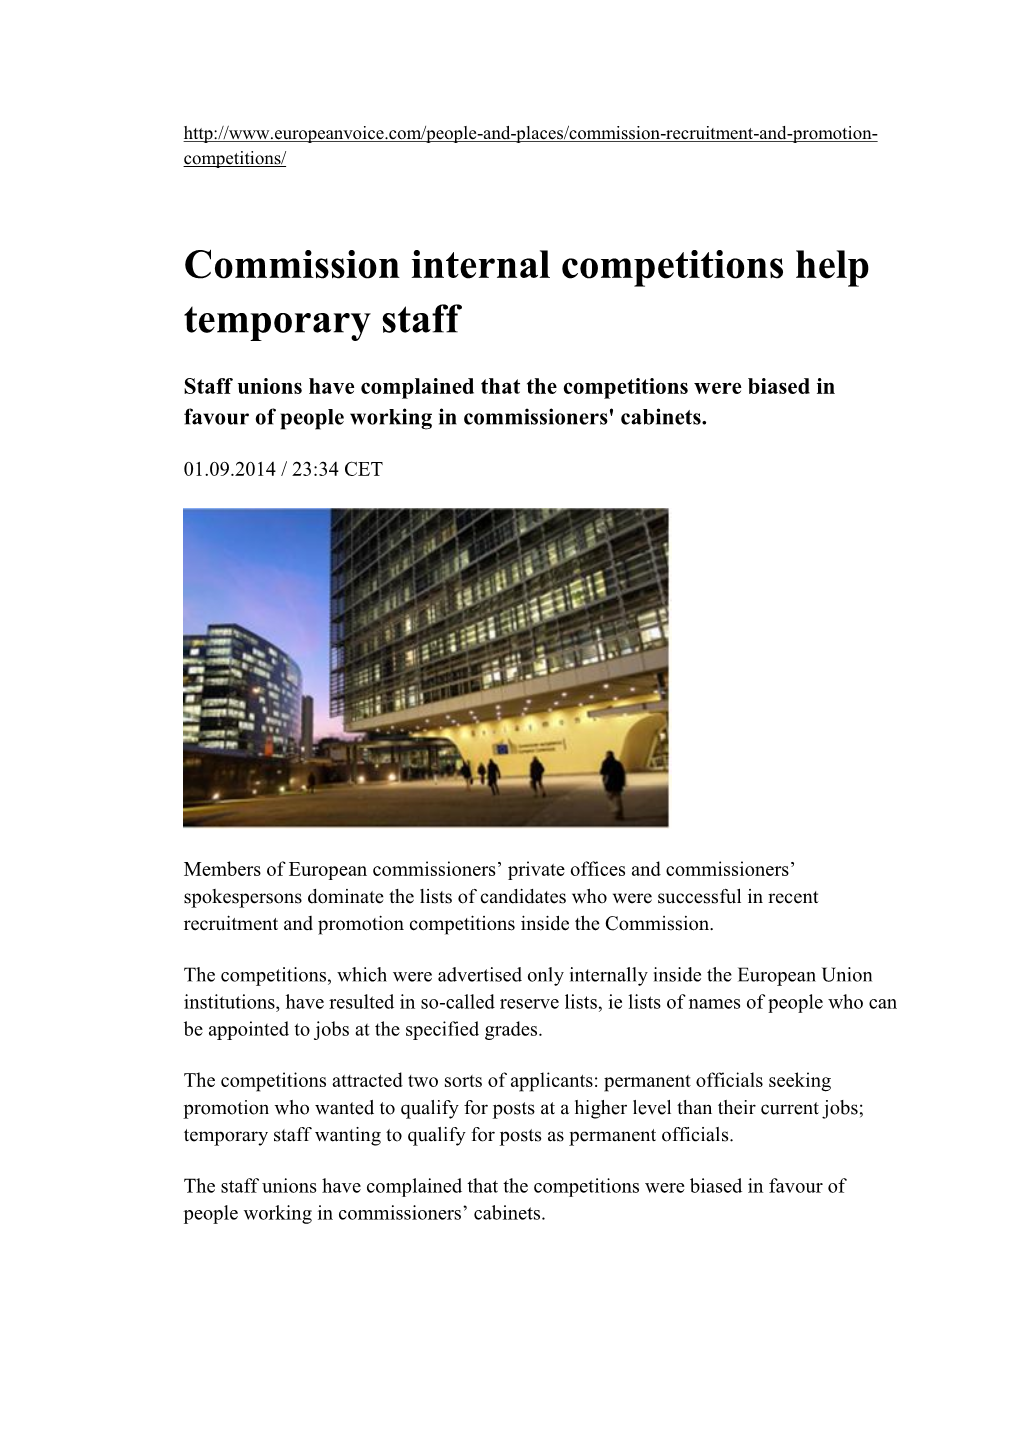 Commission Internal Competitions Help Temporary Staff